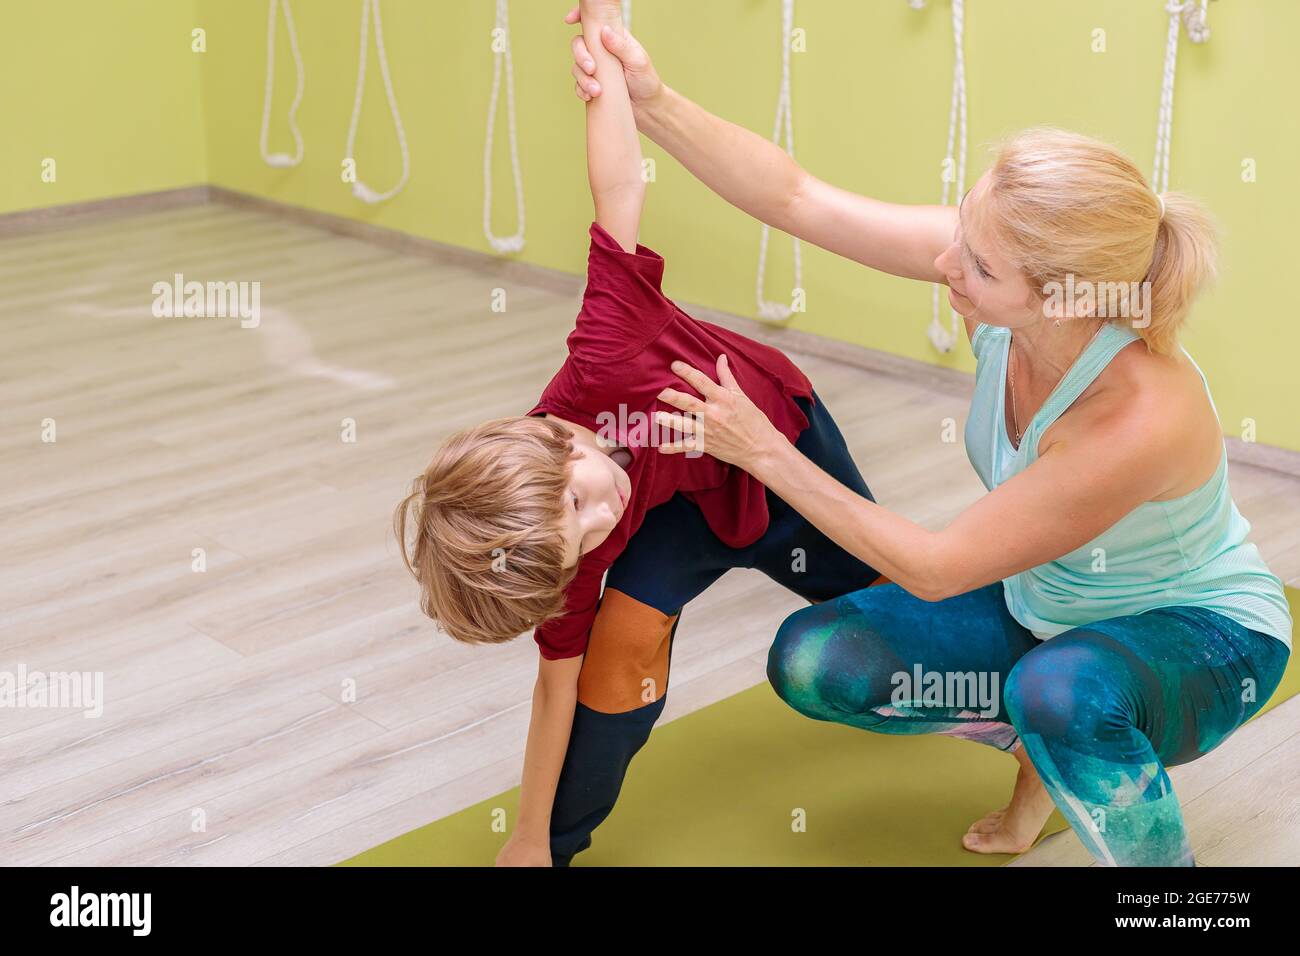 A woman instructor in a sports uniform is engaged in yoga with a boy. The girl corrects the asanas for the child. Calm, balance and concentration conc Stock Photo